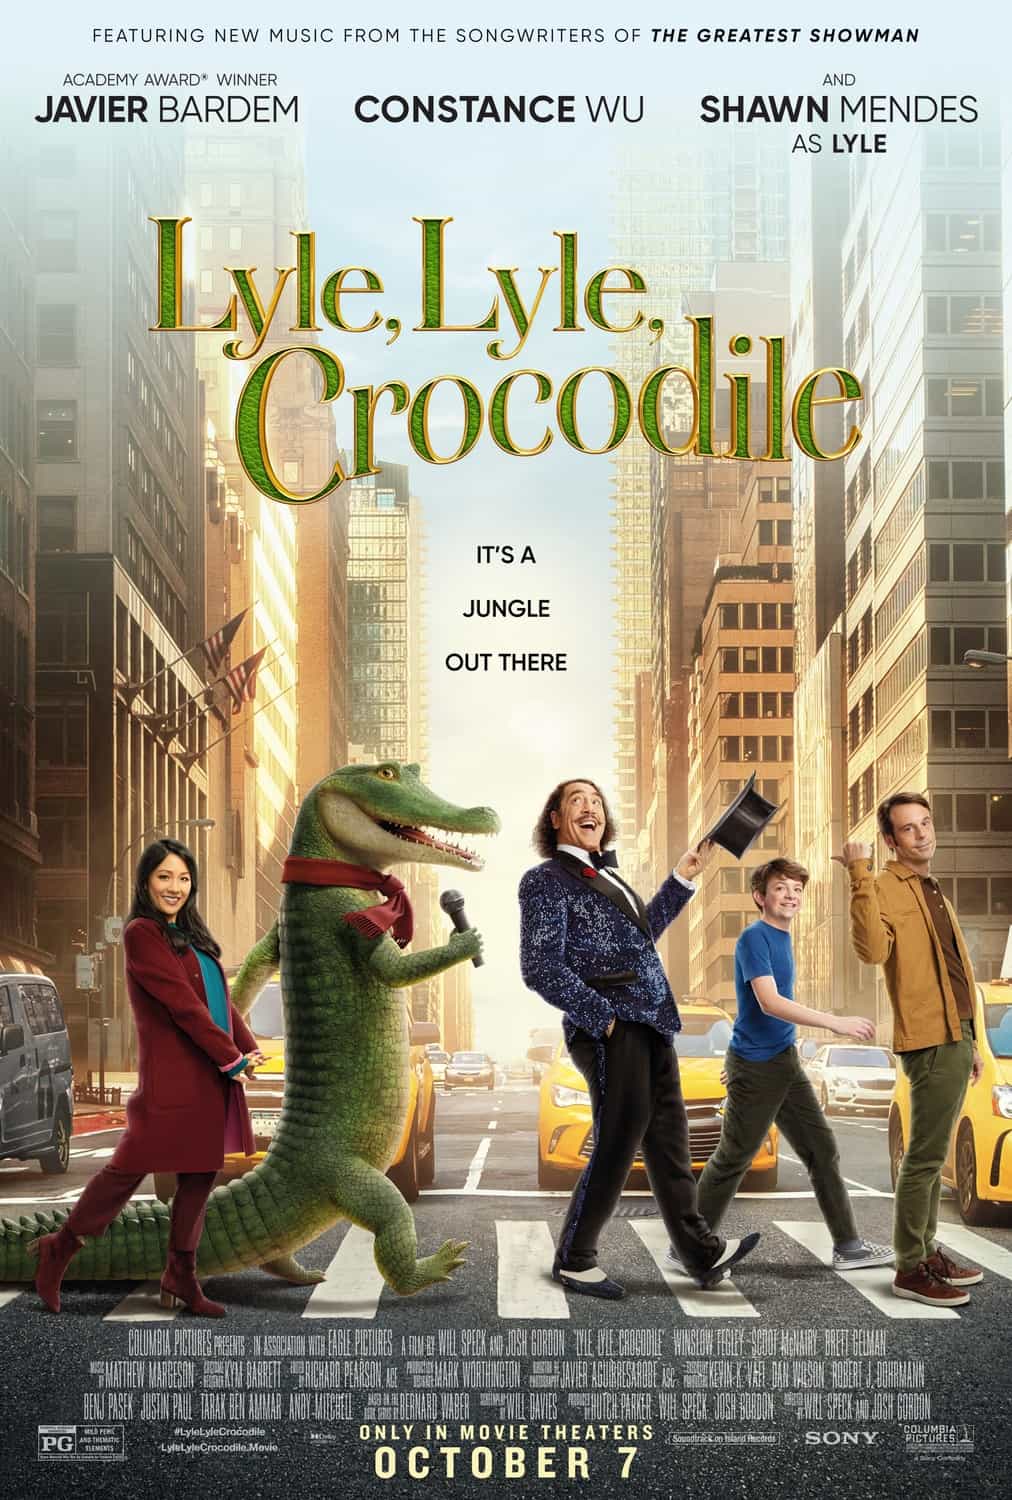 This weeks North American new movie preview 7th October 2022 - Lyle, Lyle, Crocodile and Amsterdam - #lylelylecrocodile #amsterdam